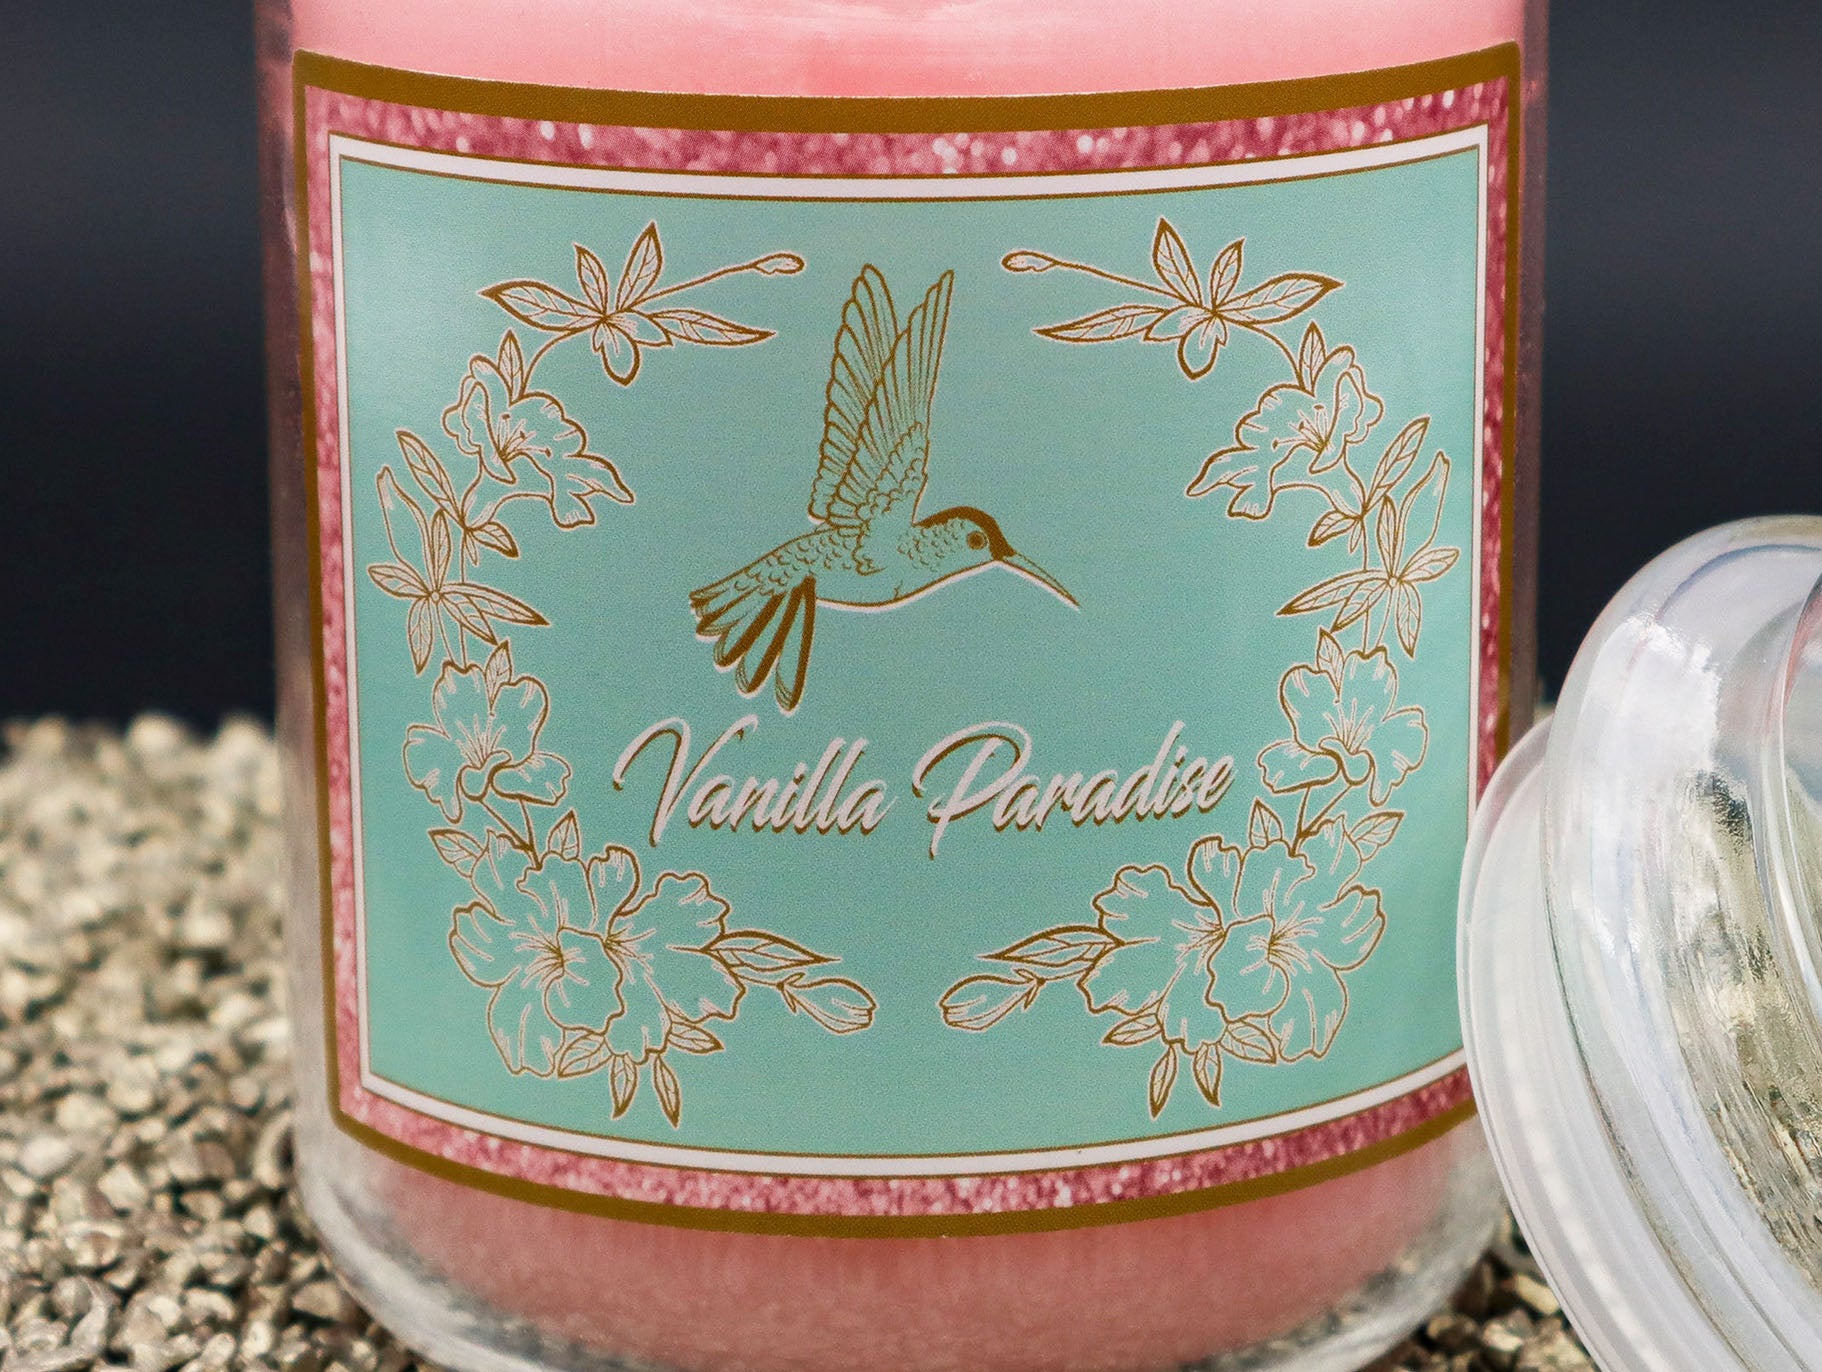 Duftkerze by Style Your Home "Vanilla Paradise“ 630g